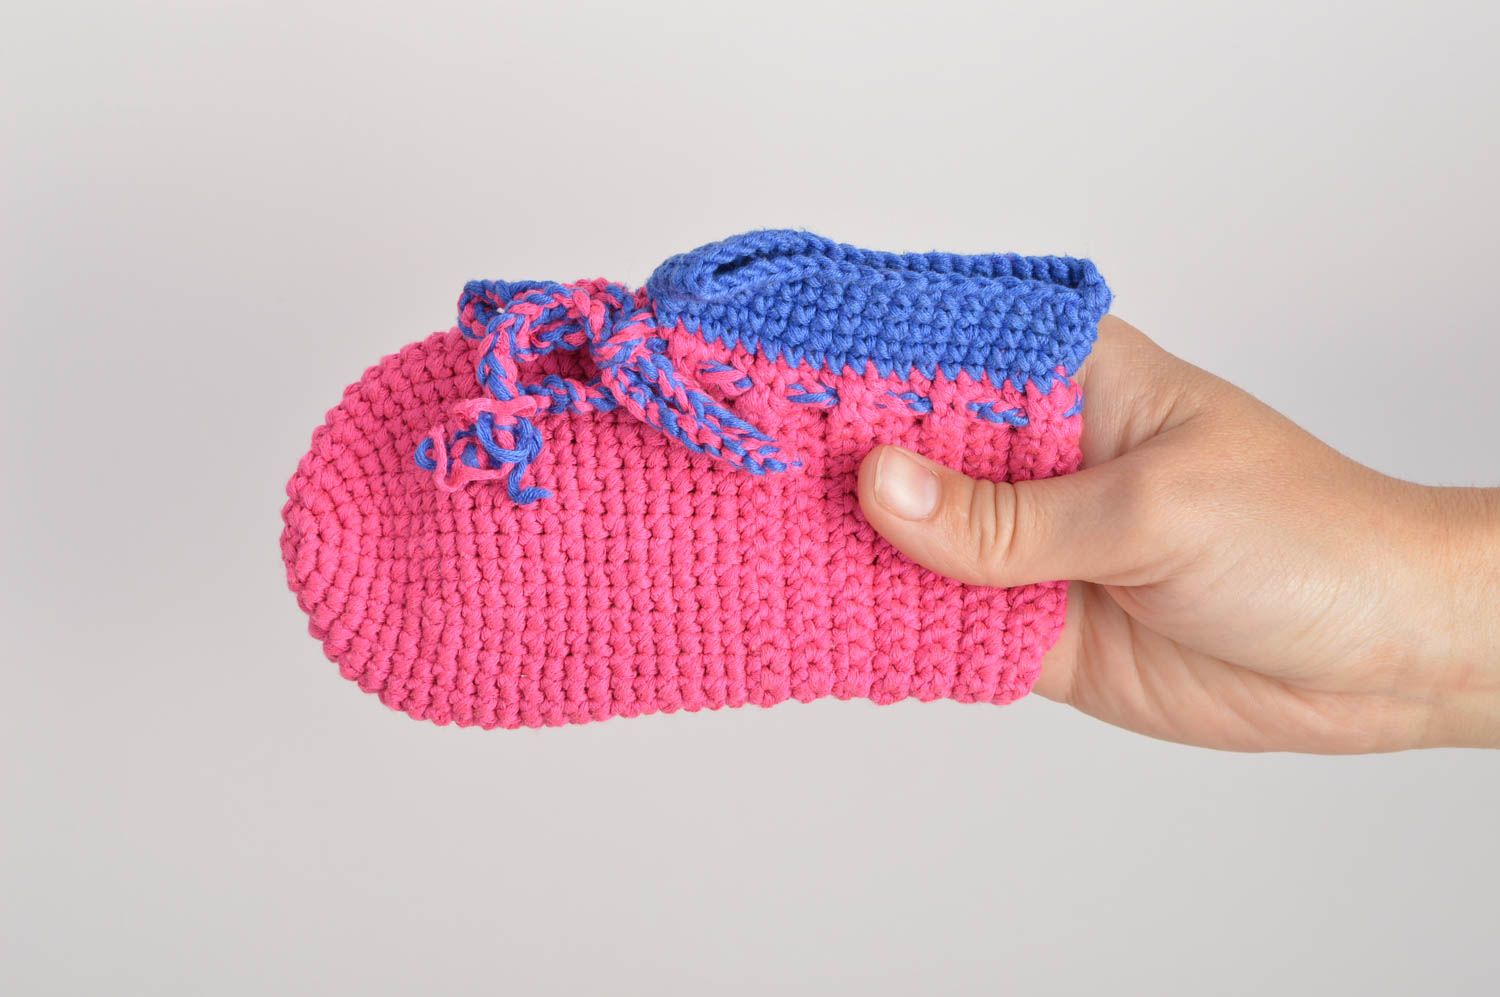 Handmade crochet baby booties goods for children baby shoes best gifts for kids photo 2